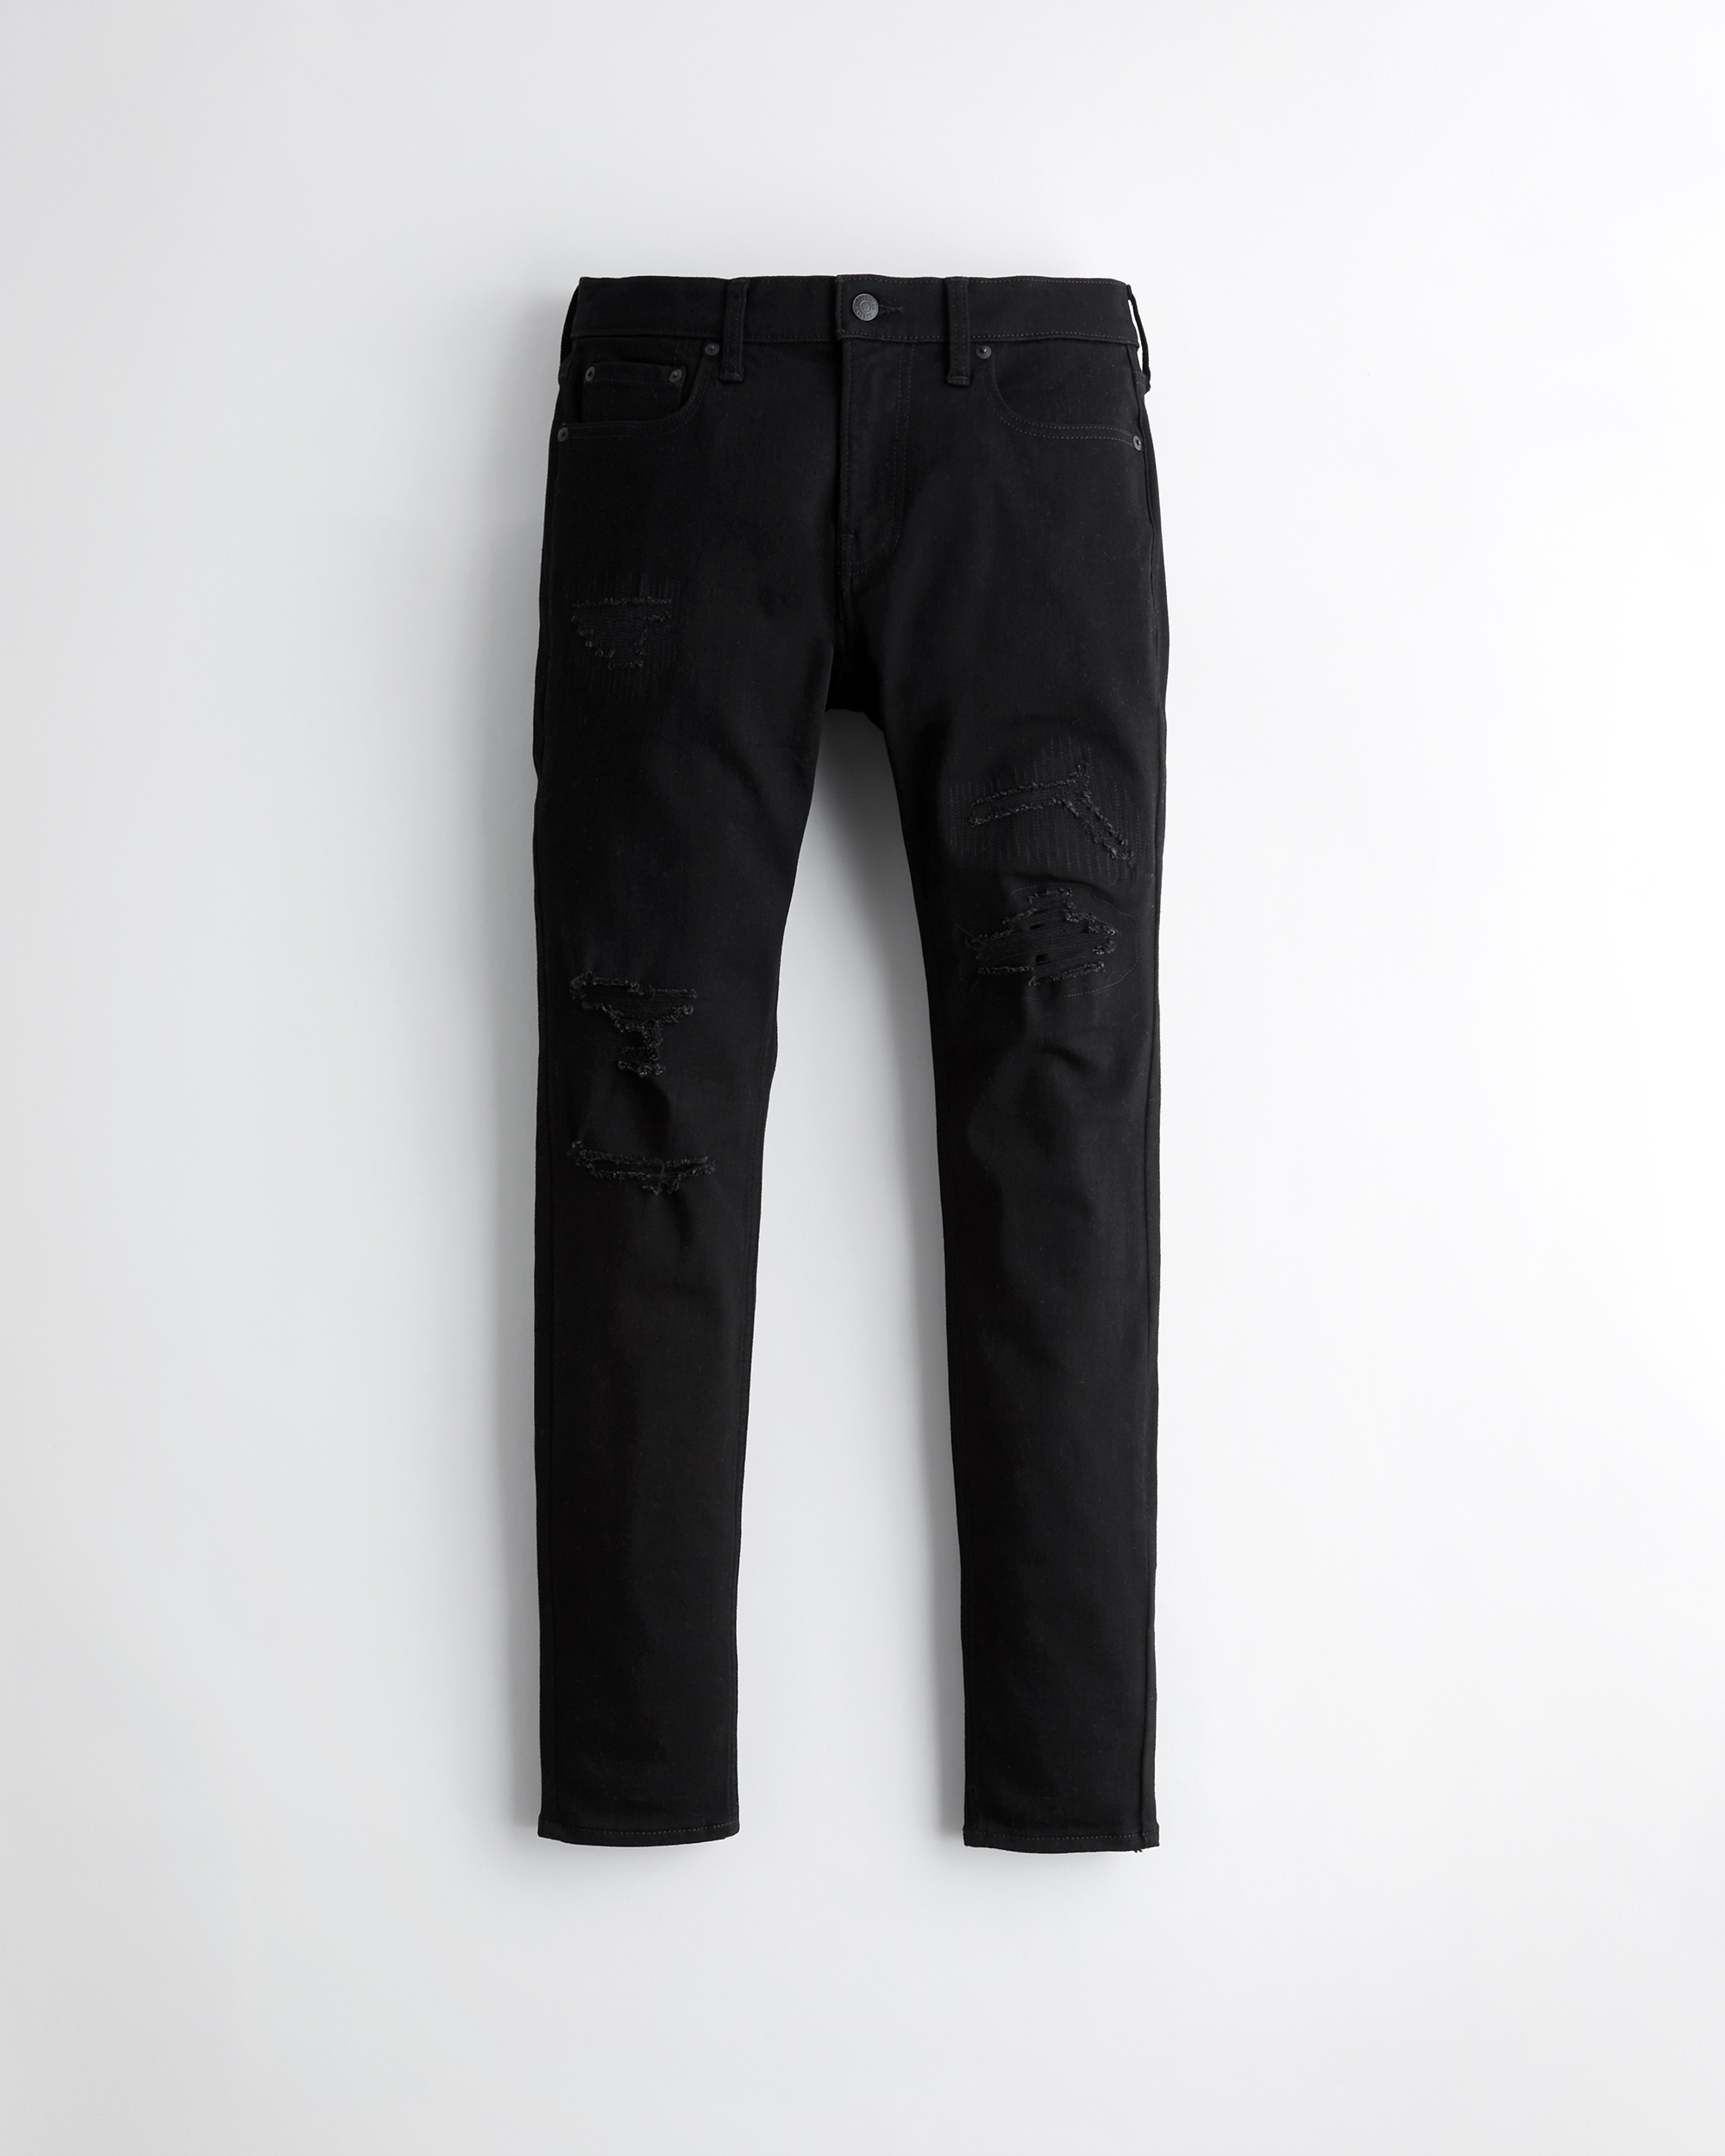 hollister black ripped jeans